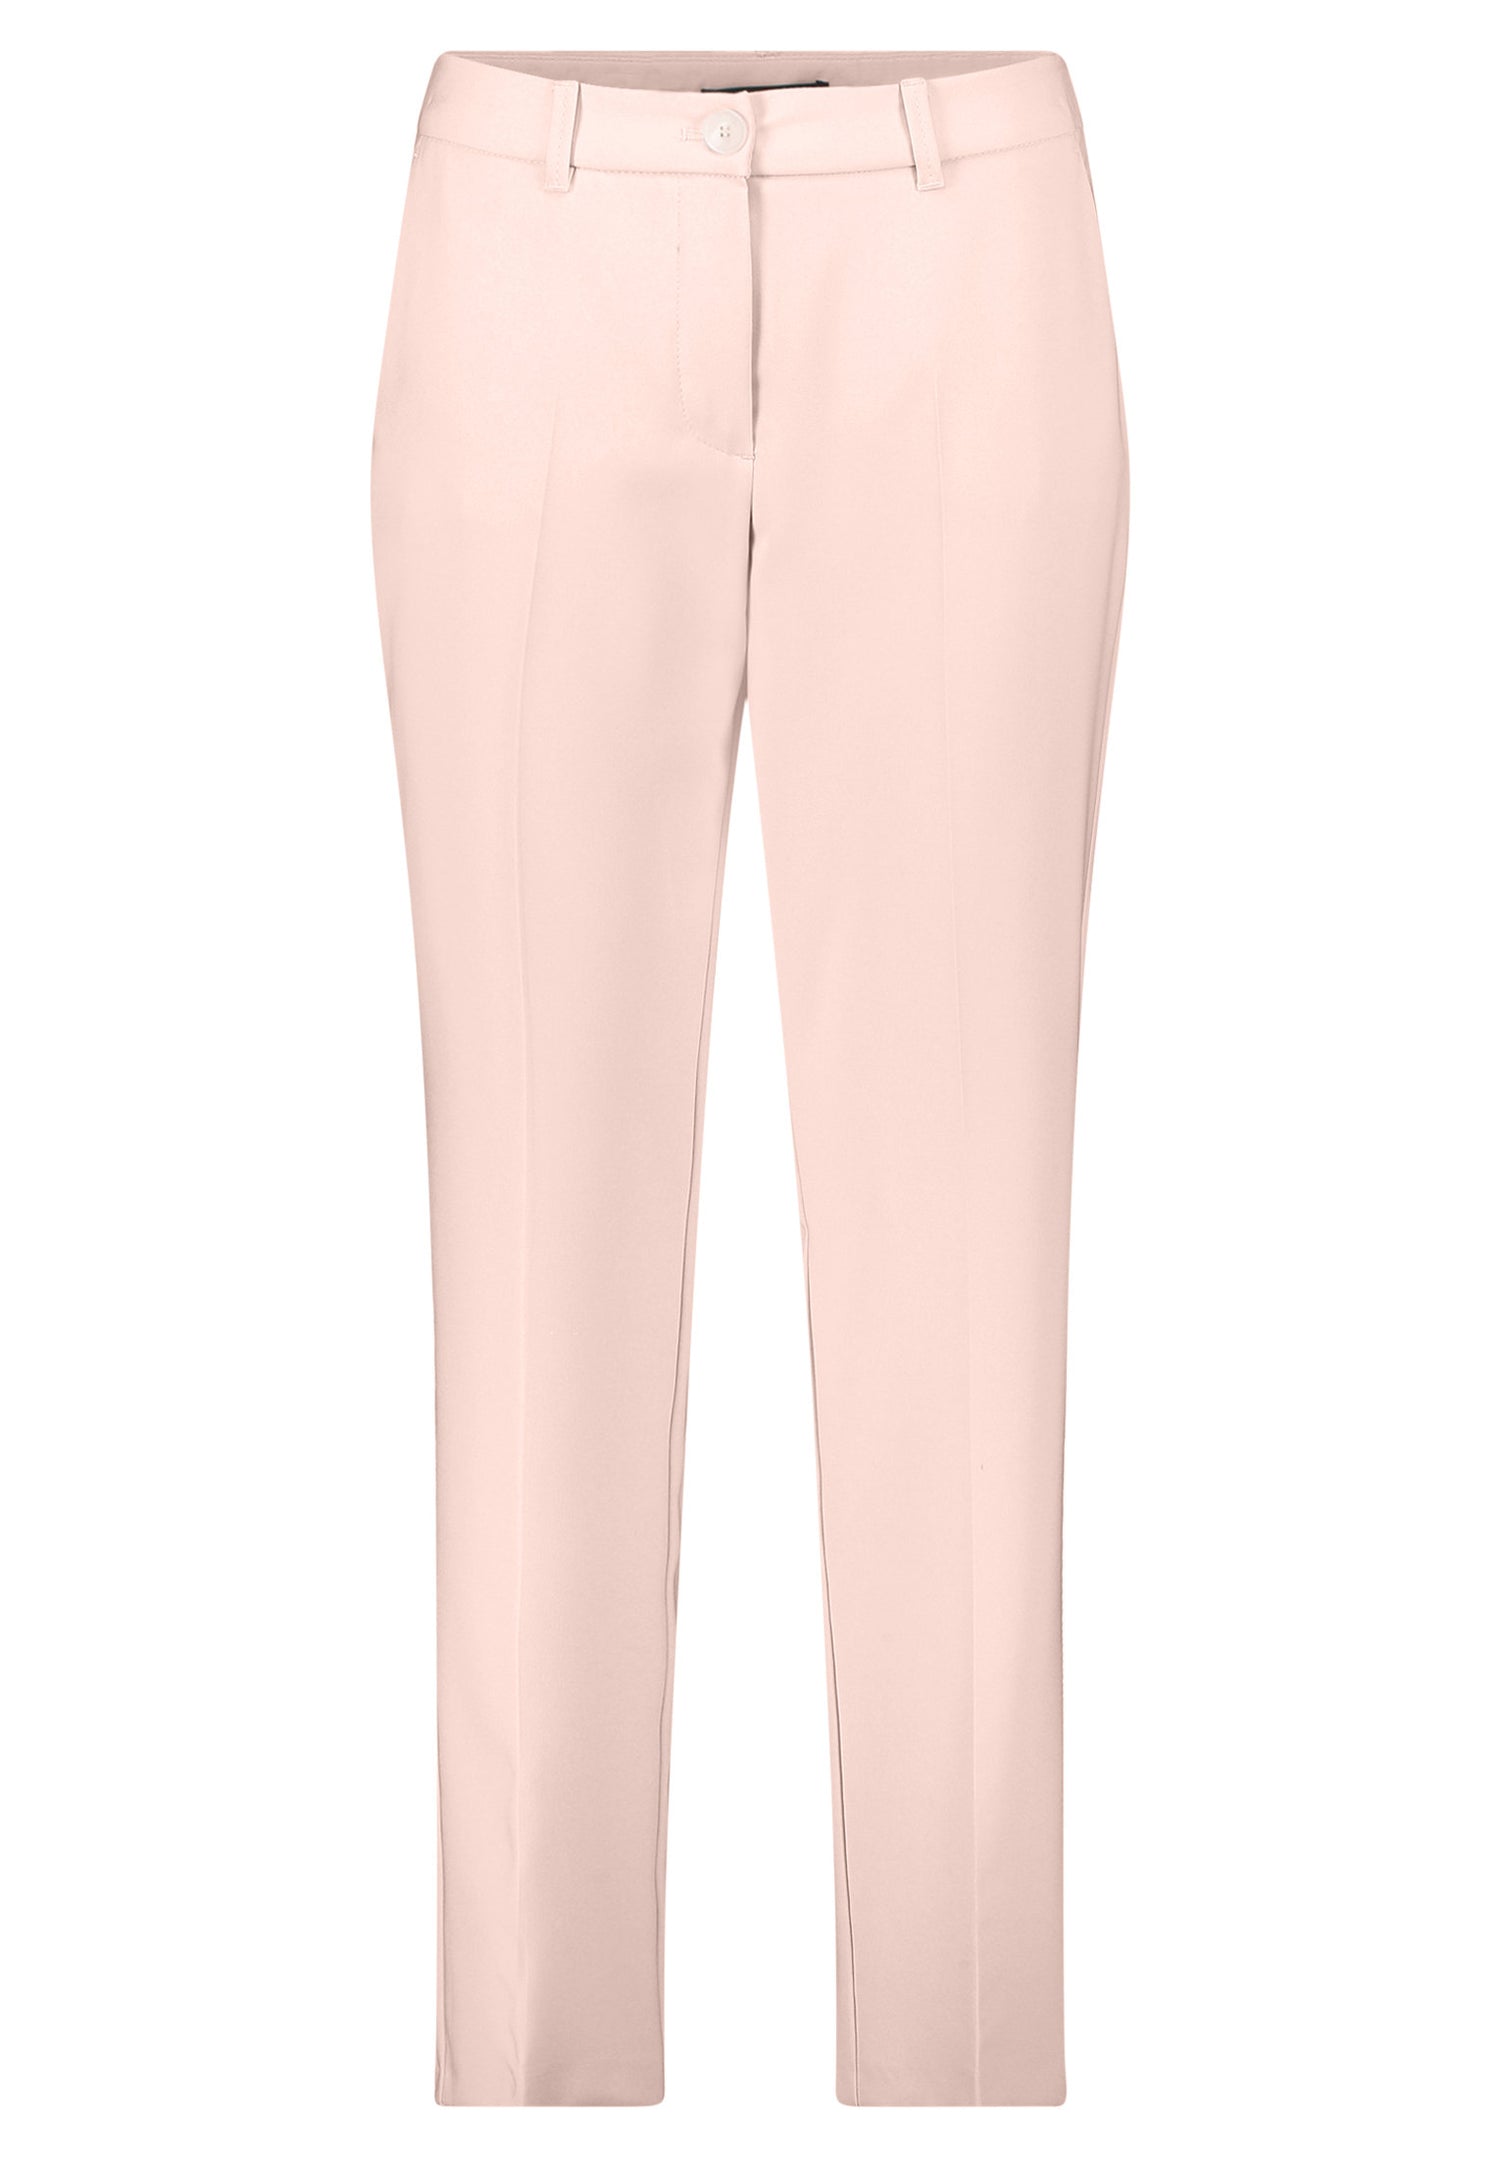 Business Trousers
With Crease_6002-1080_6055_02